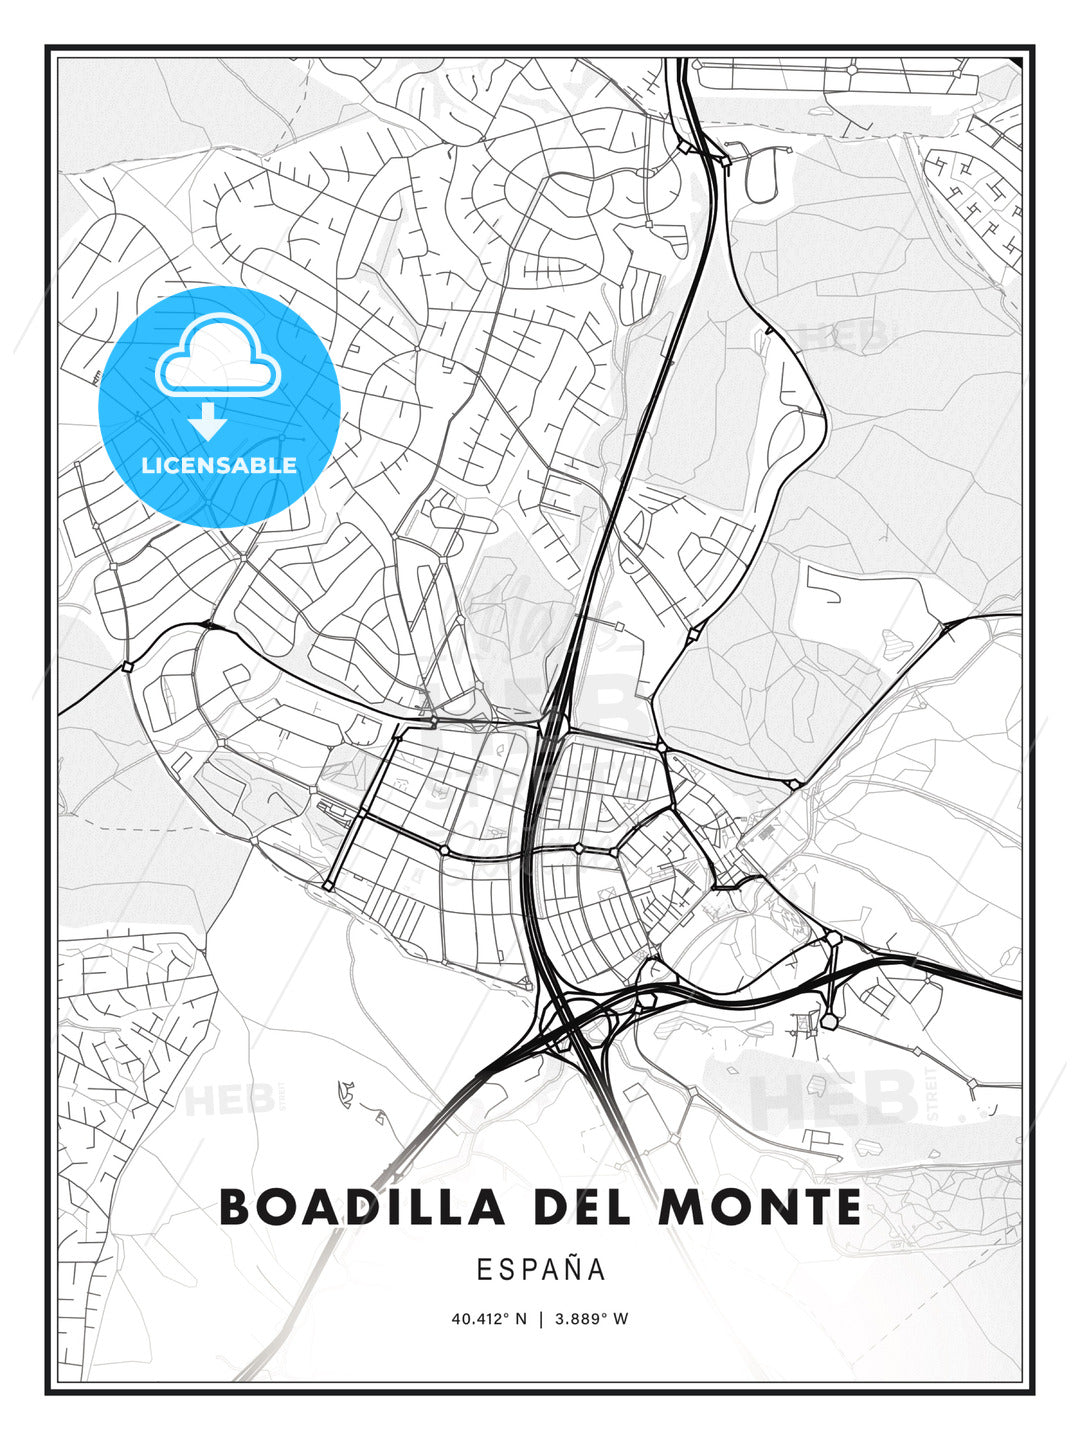 Boadilla del Monte, Spain, Modern Print Template in Various Formats - HEBSTREITS Sketches